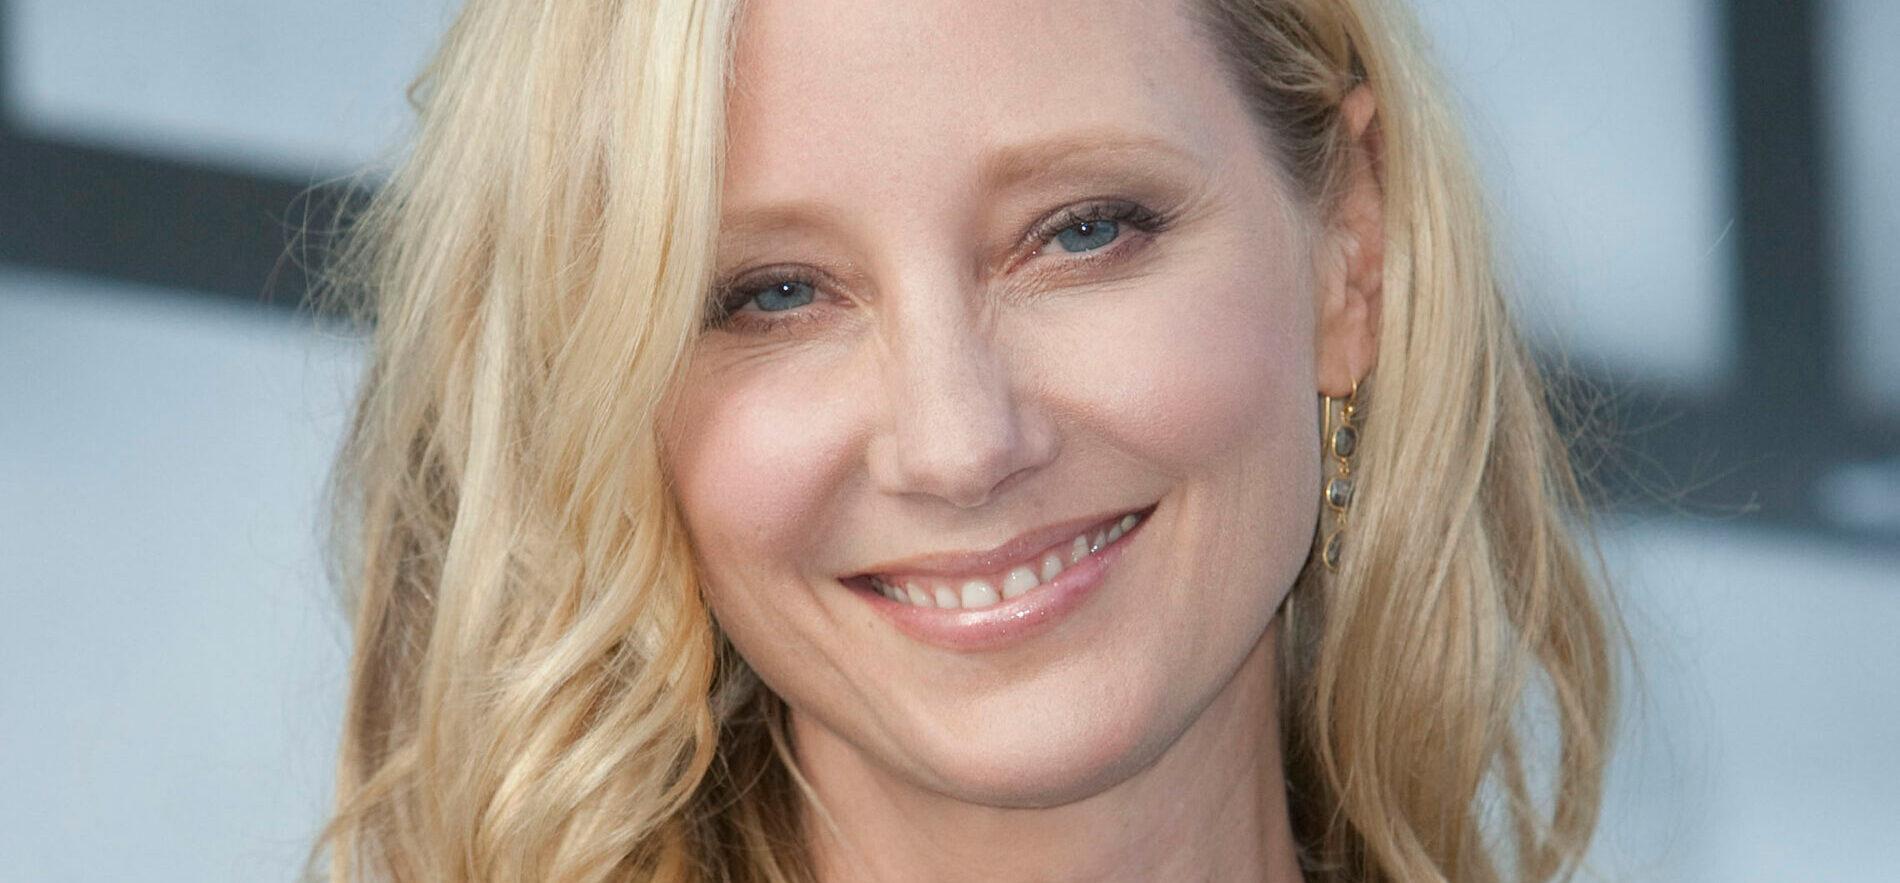 Anne Heche 'Not Expected To Recover' After Car Crash